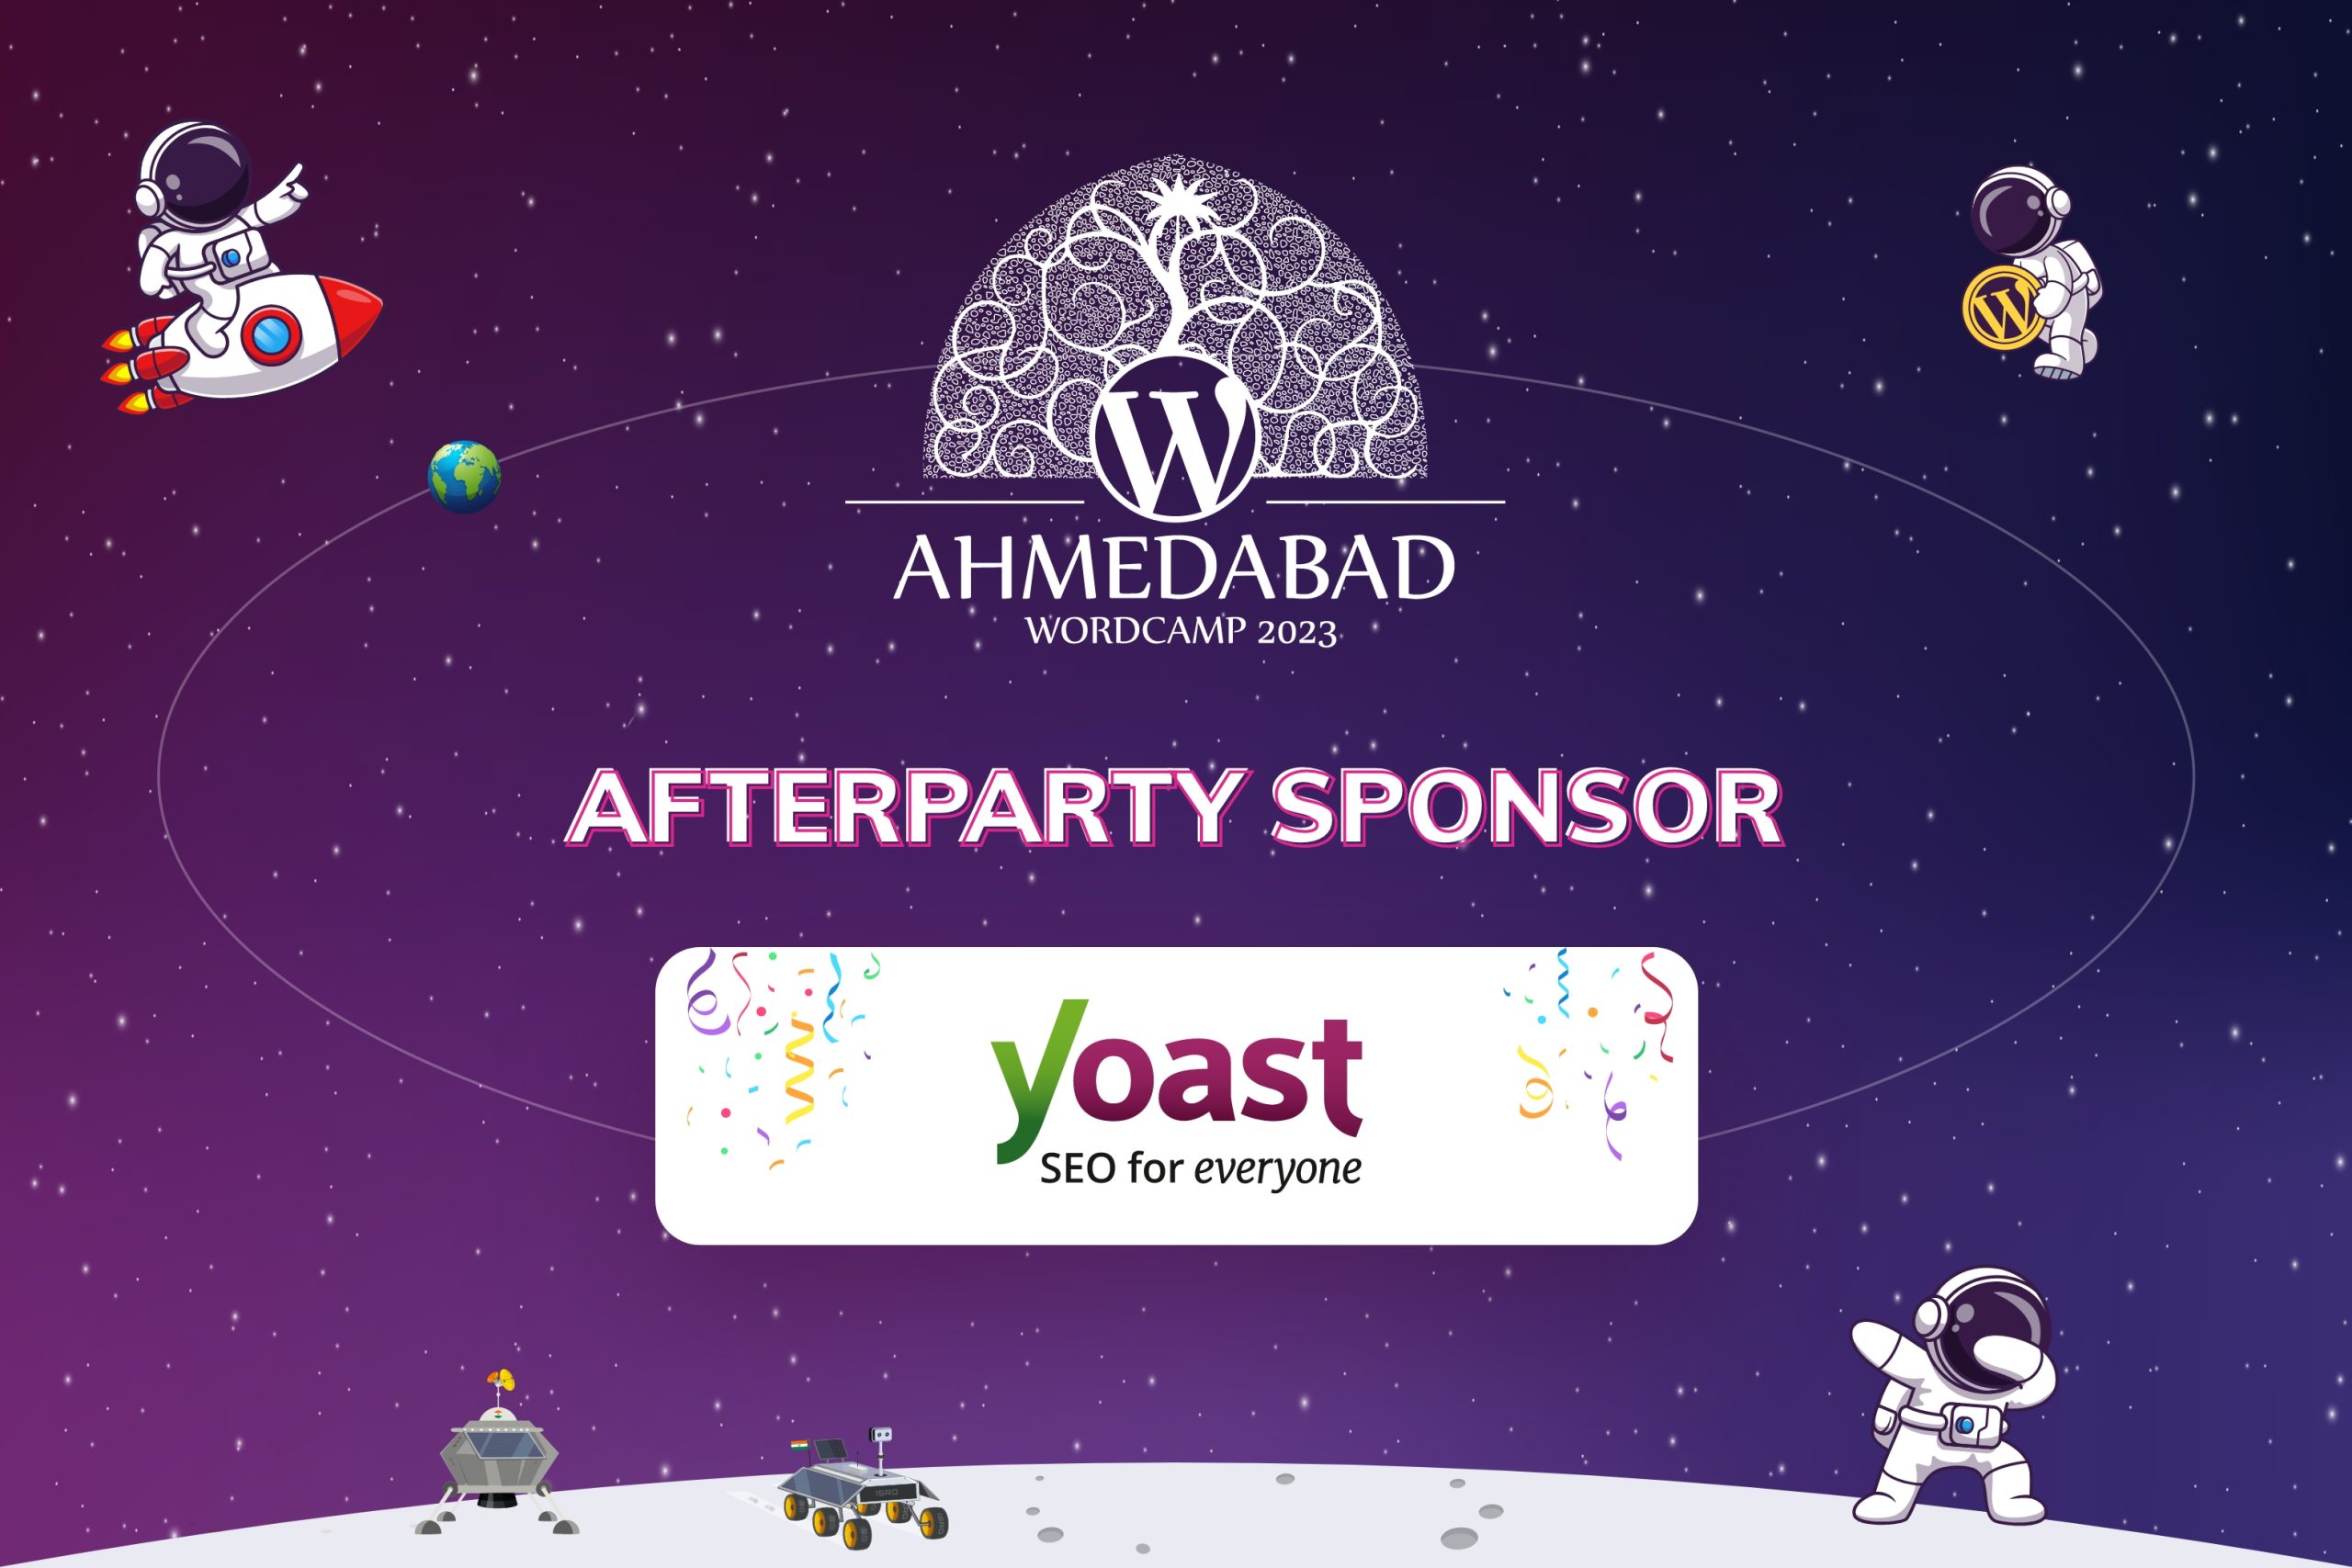 Thank You Yoast, for being our After Party Sponsor